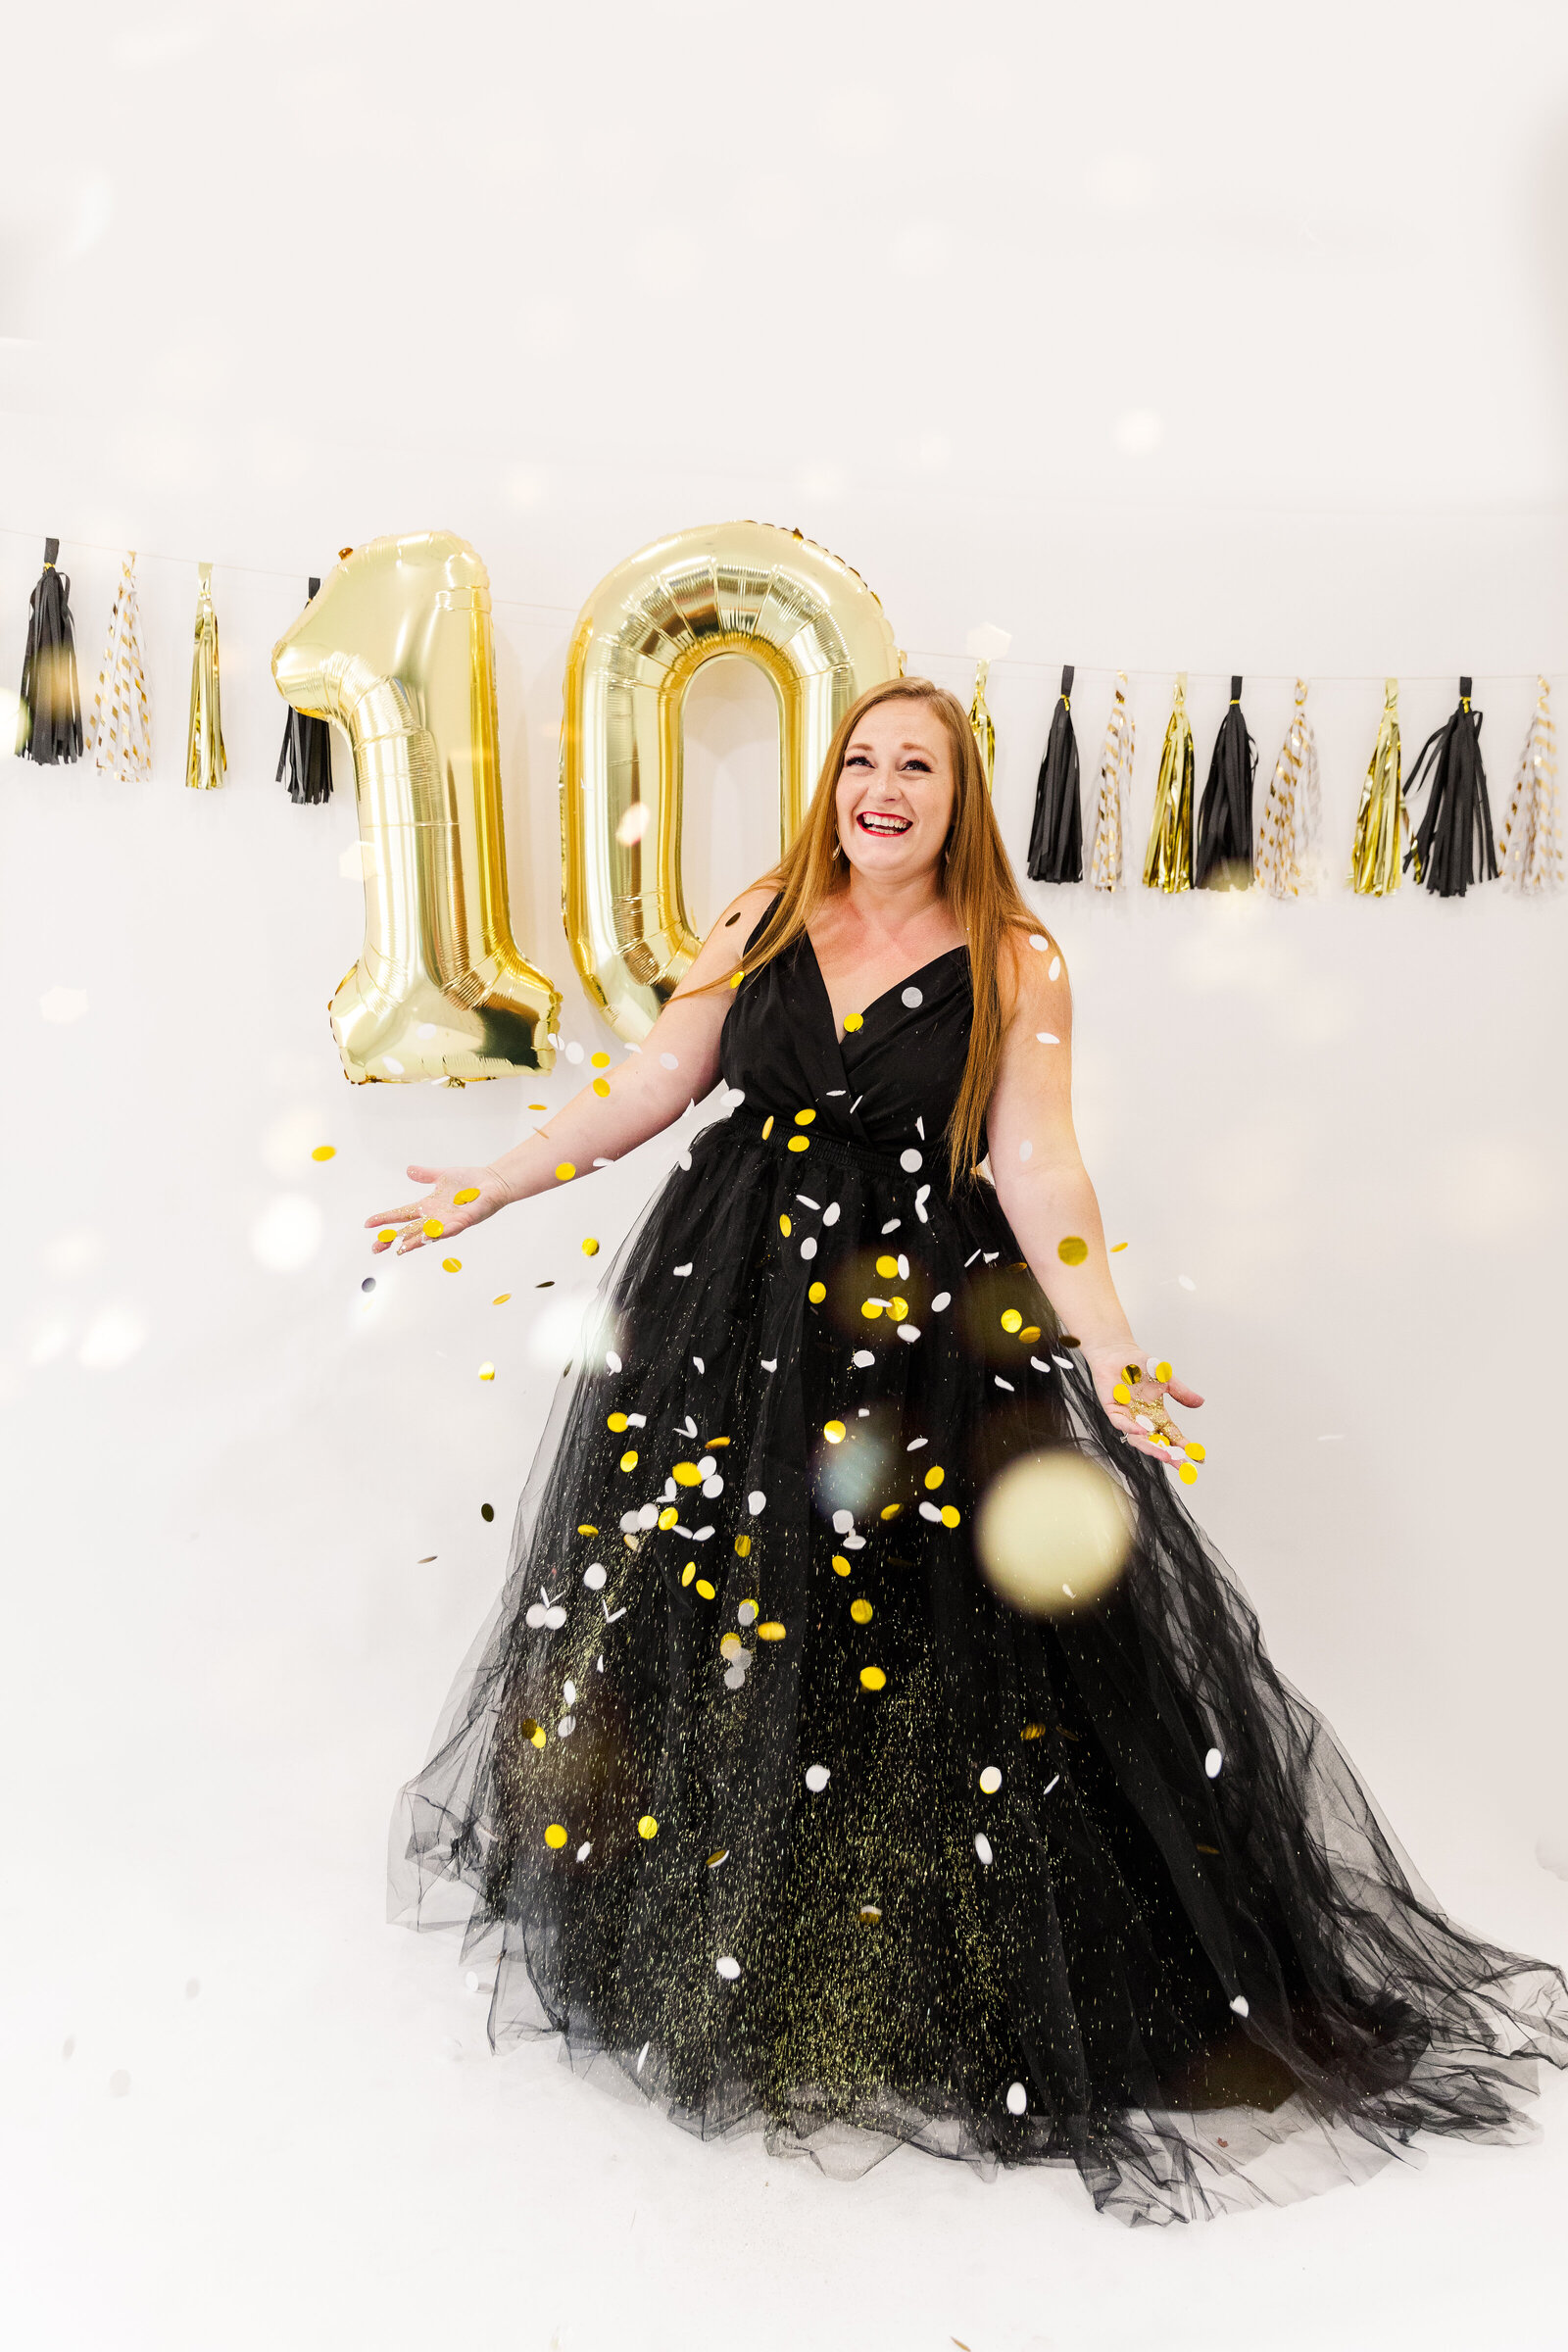 jeanizecilliersphotography-10years-5